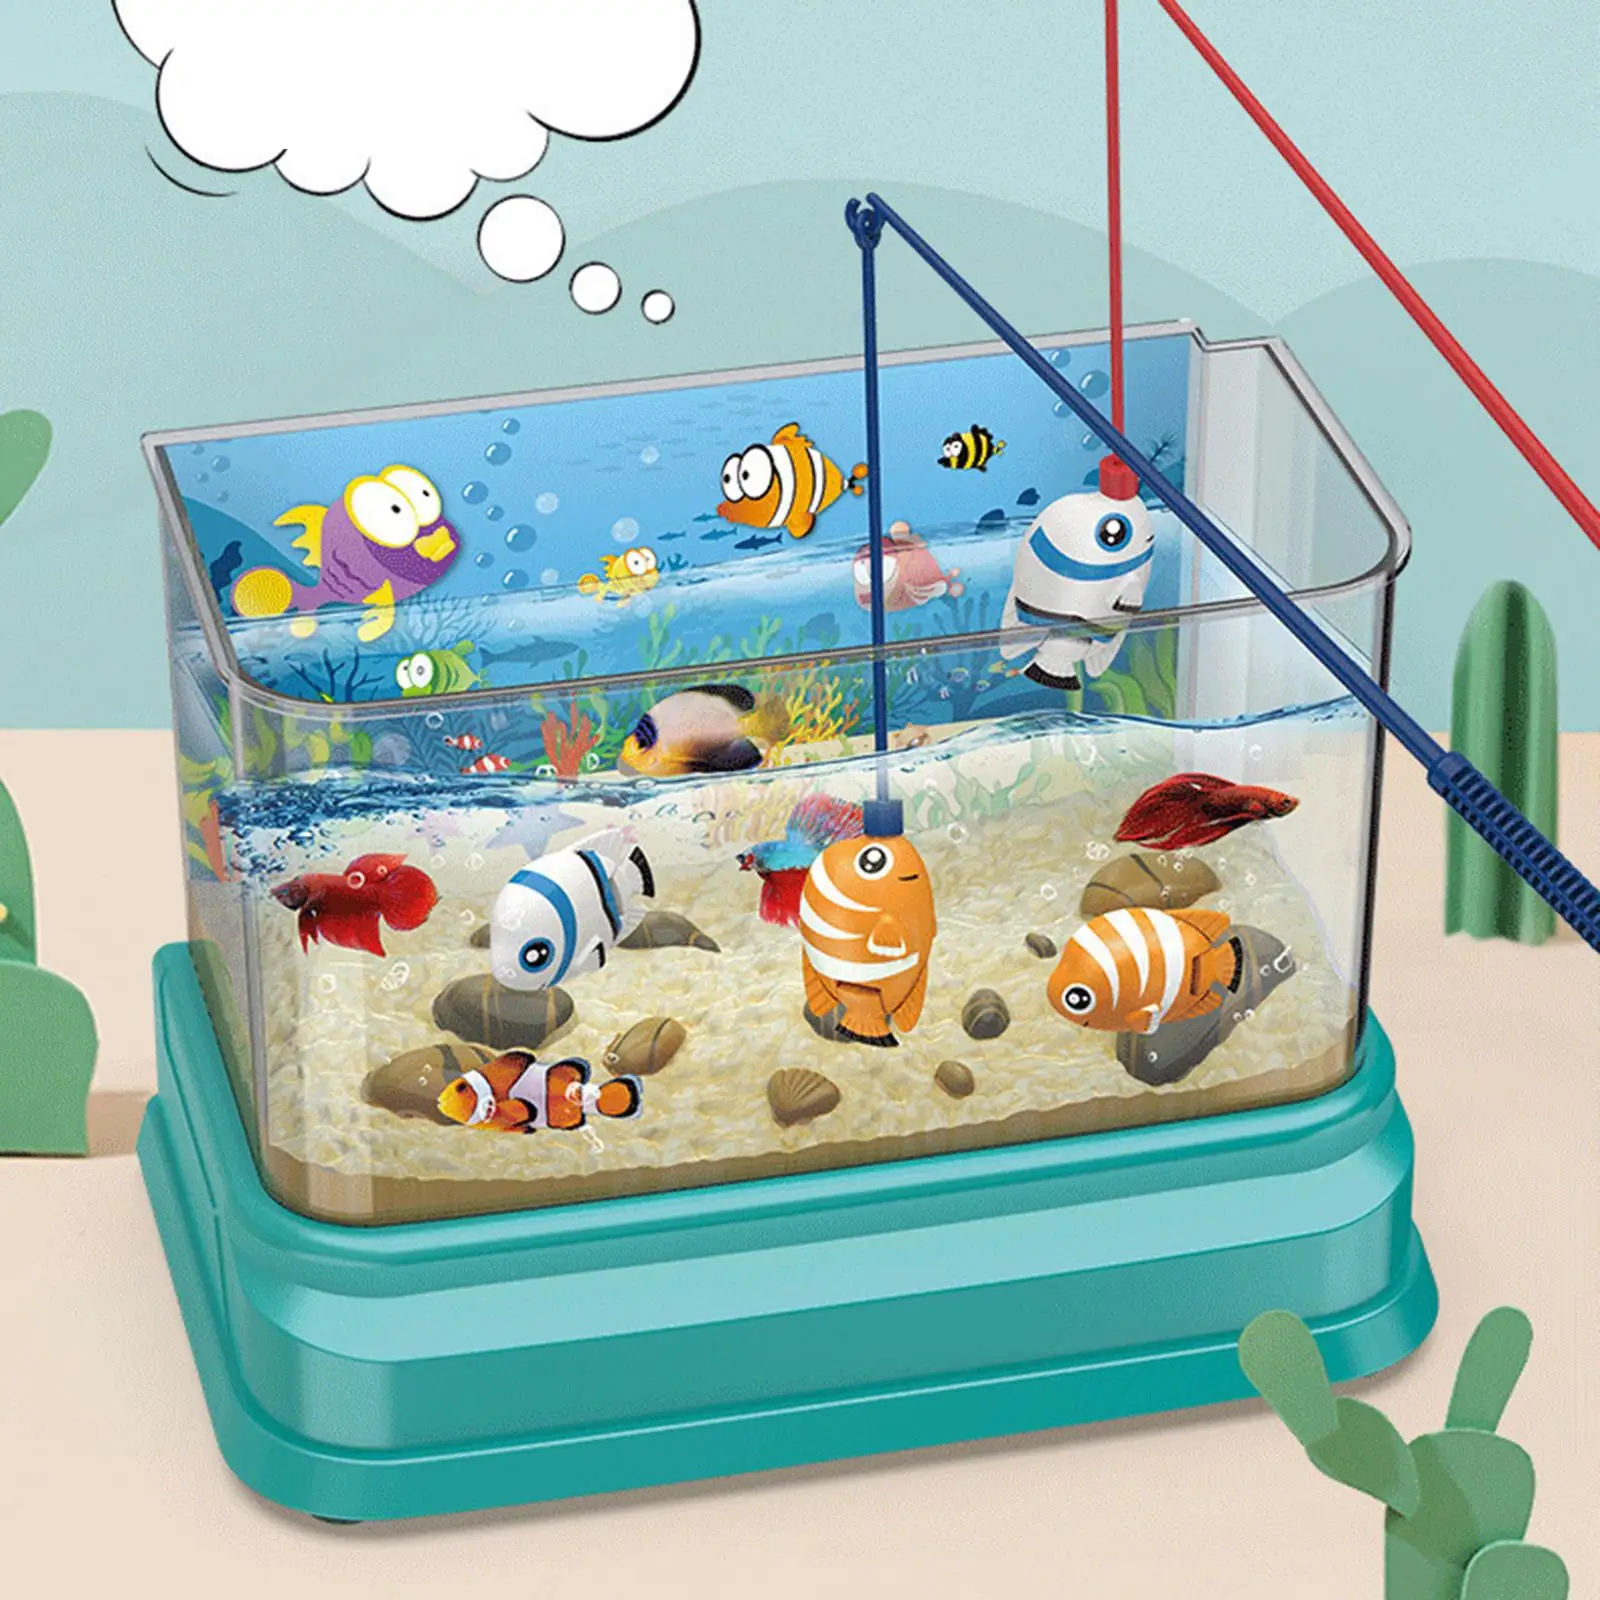 Small Aquarium Educational Toys with USB Light Kids Fishing for Toddlers